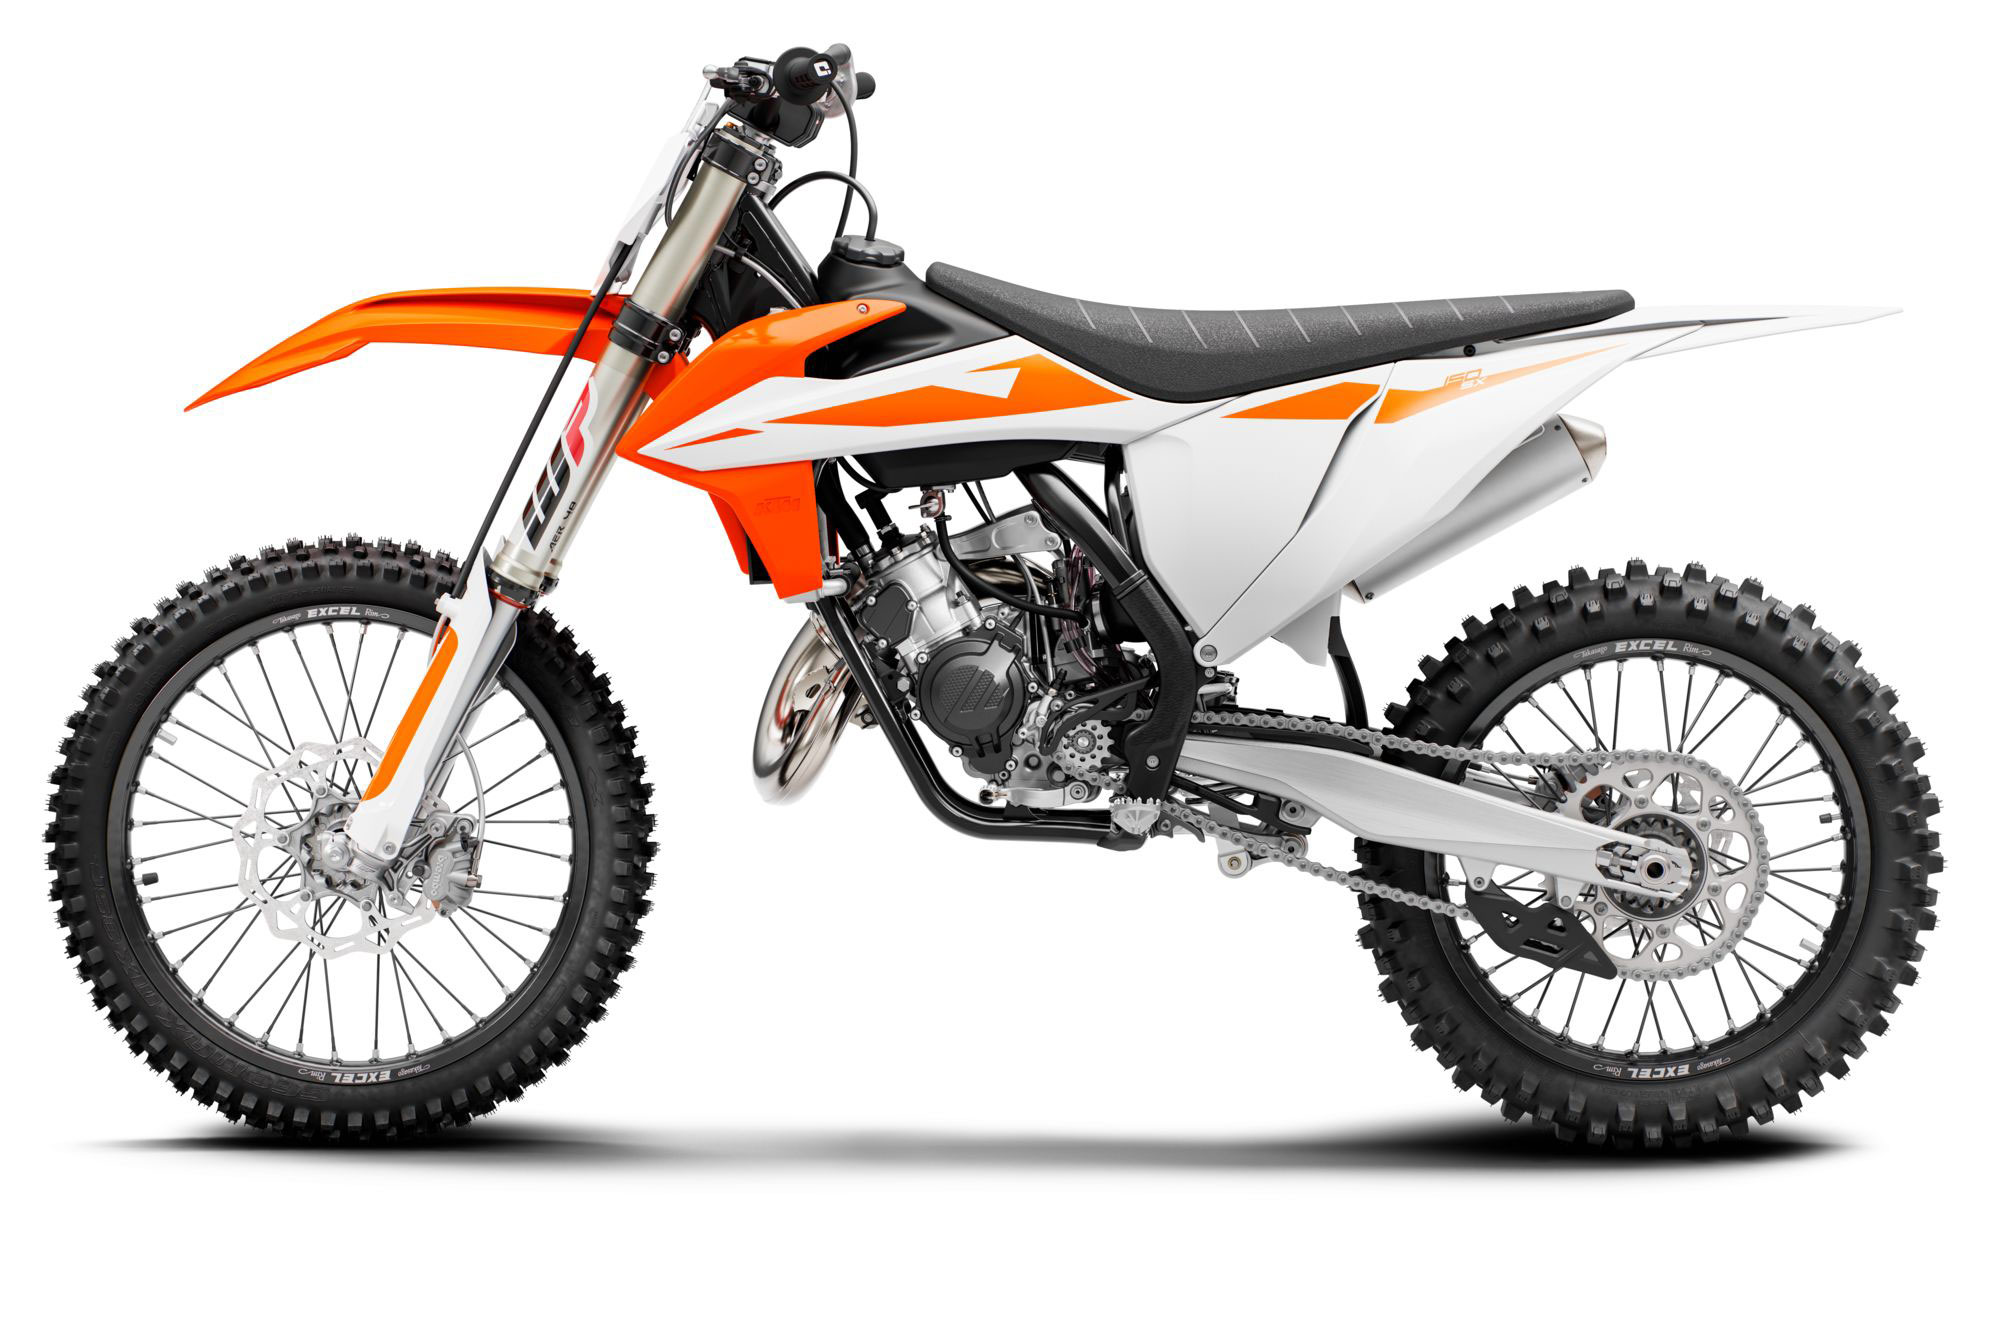 2019 KTM 150 SX Guide • Motorcycle